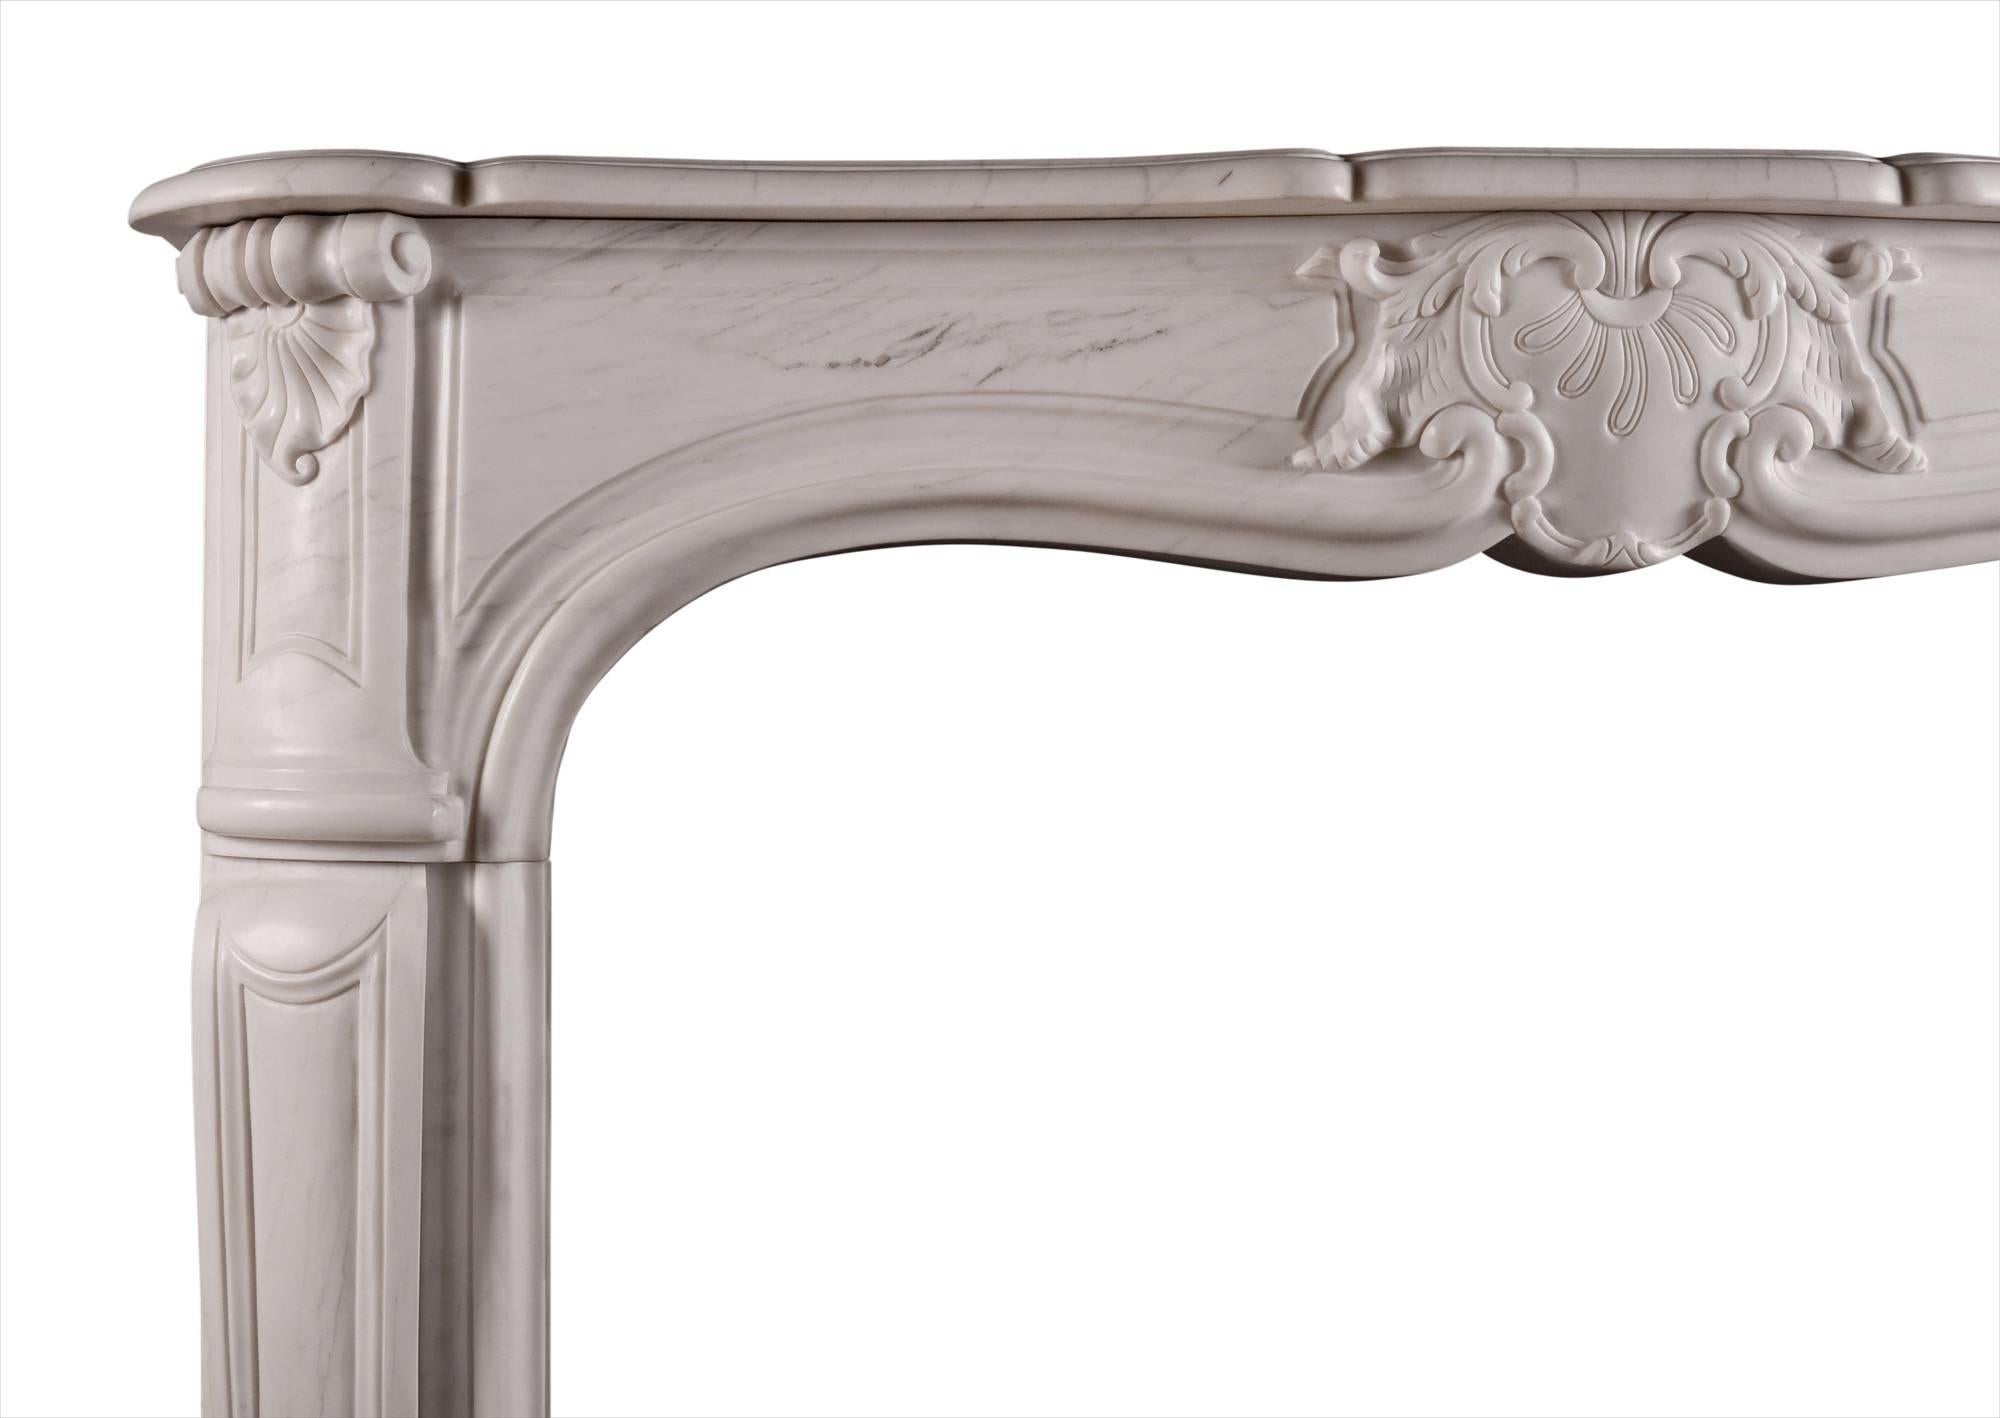 A French Louis XV style fireplace in white marble. The shaped, panelled jambs surmounted by frieze with carved shell and scrolls. Shaped shelf. Modern.

Measures: Shelf width 1524 mm 60 in
Overall height 1127 mm 44 ? in
Opening height 937 mm 36